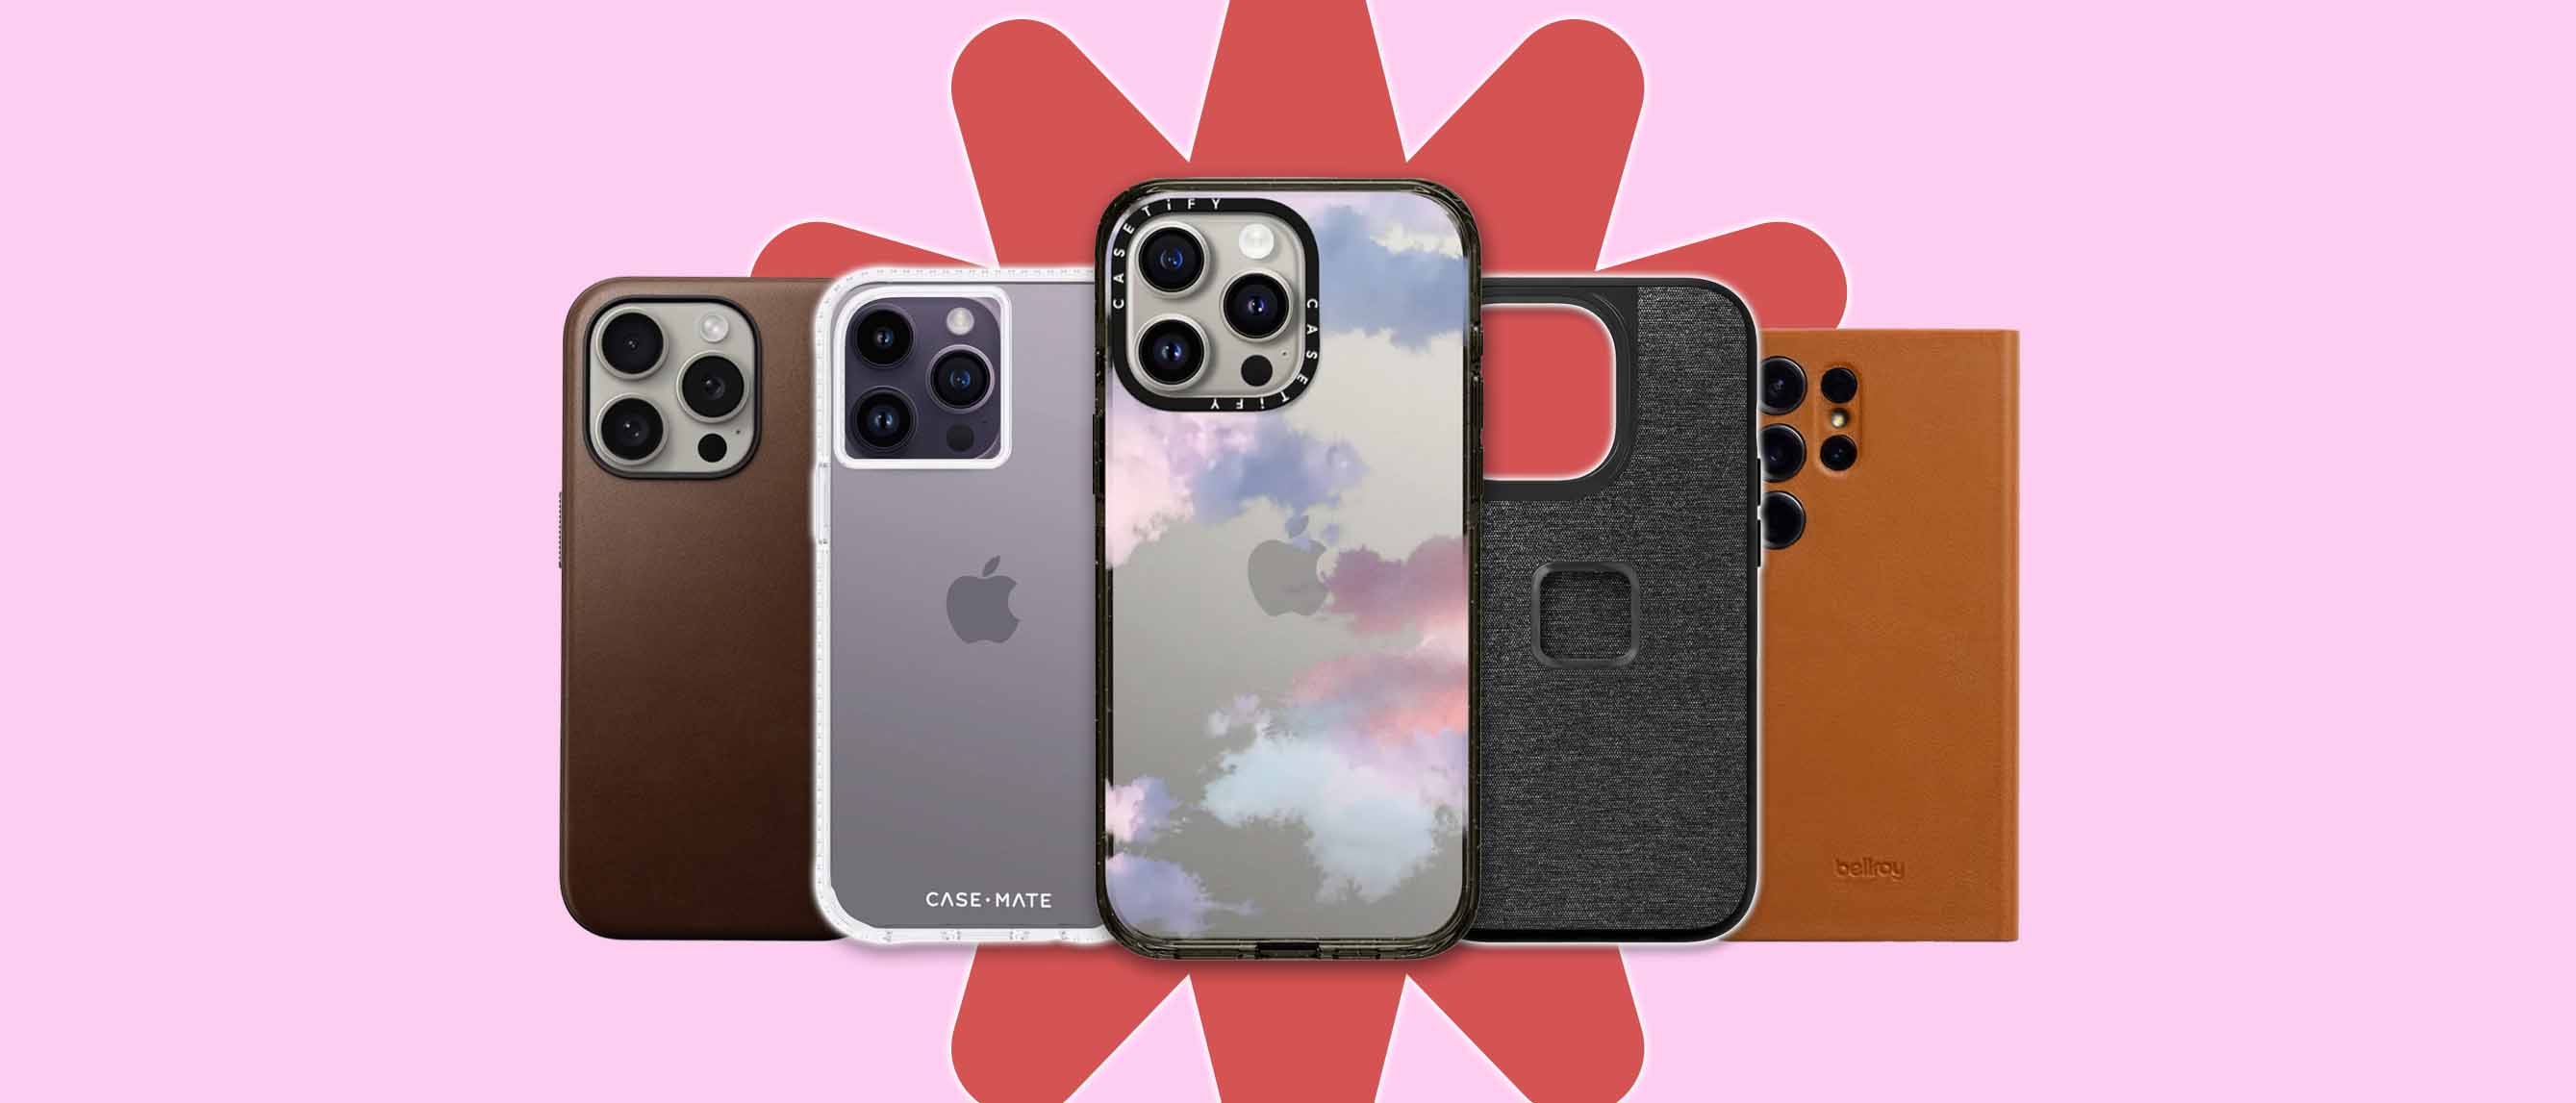 Image of 5 types of phone cases